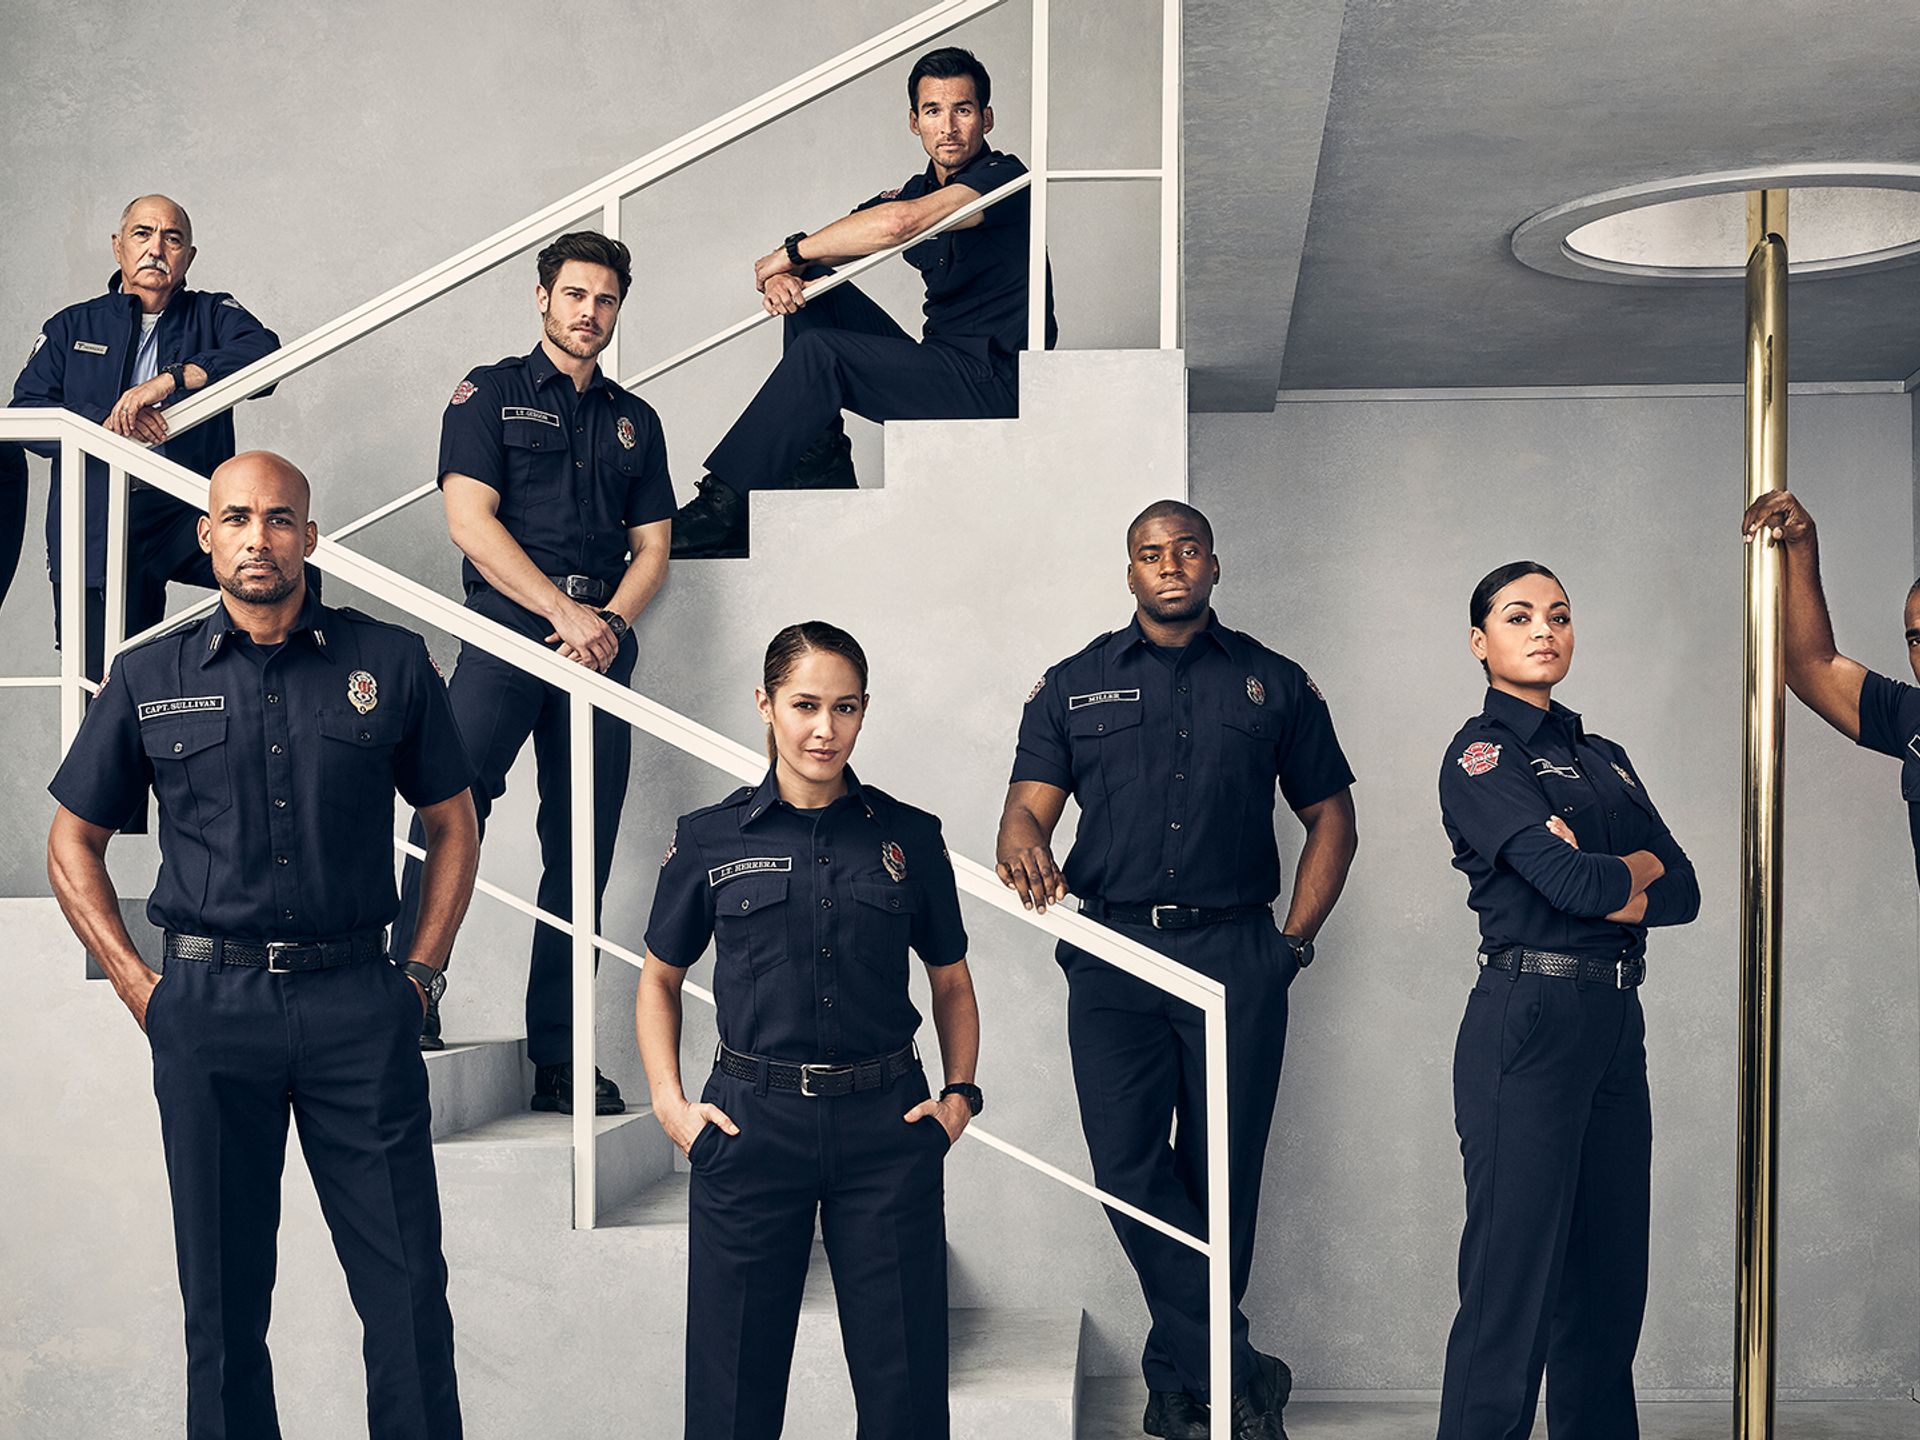 Station 19 Has Officially Been Renewed for Season 6 at ABC